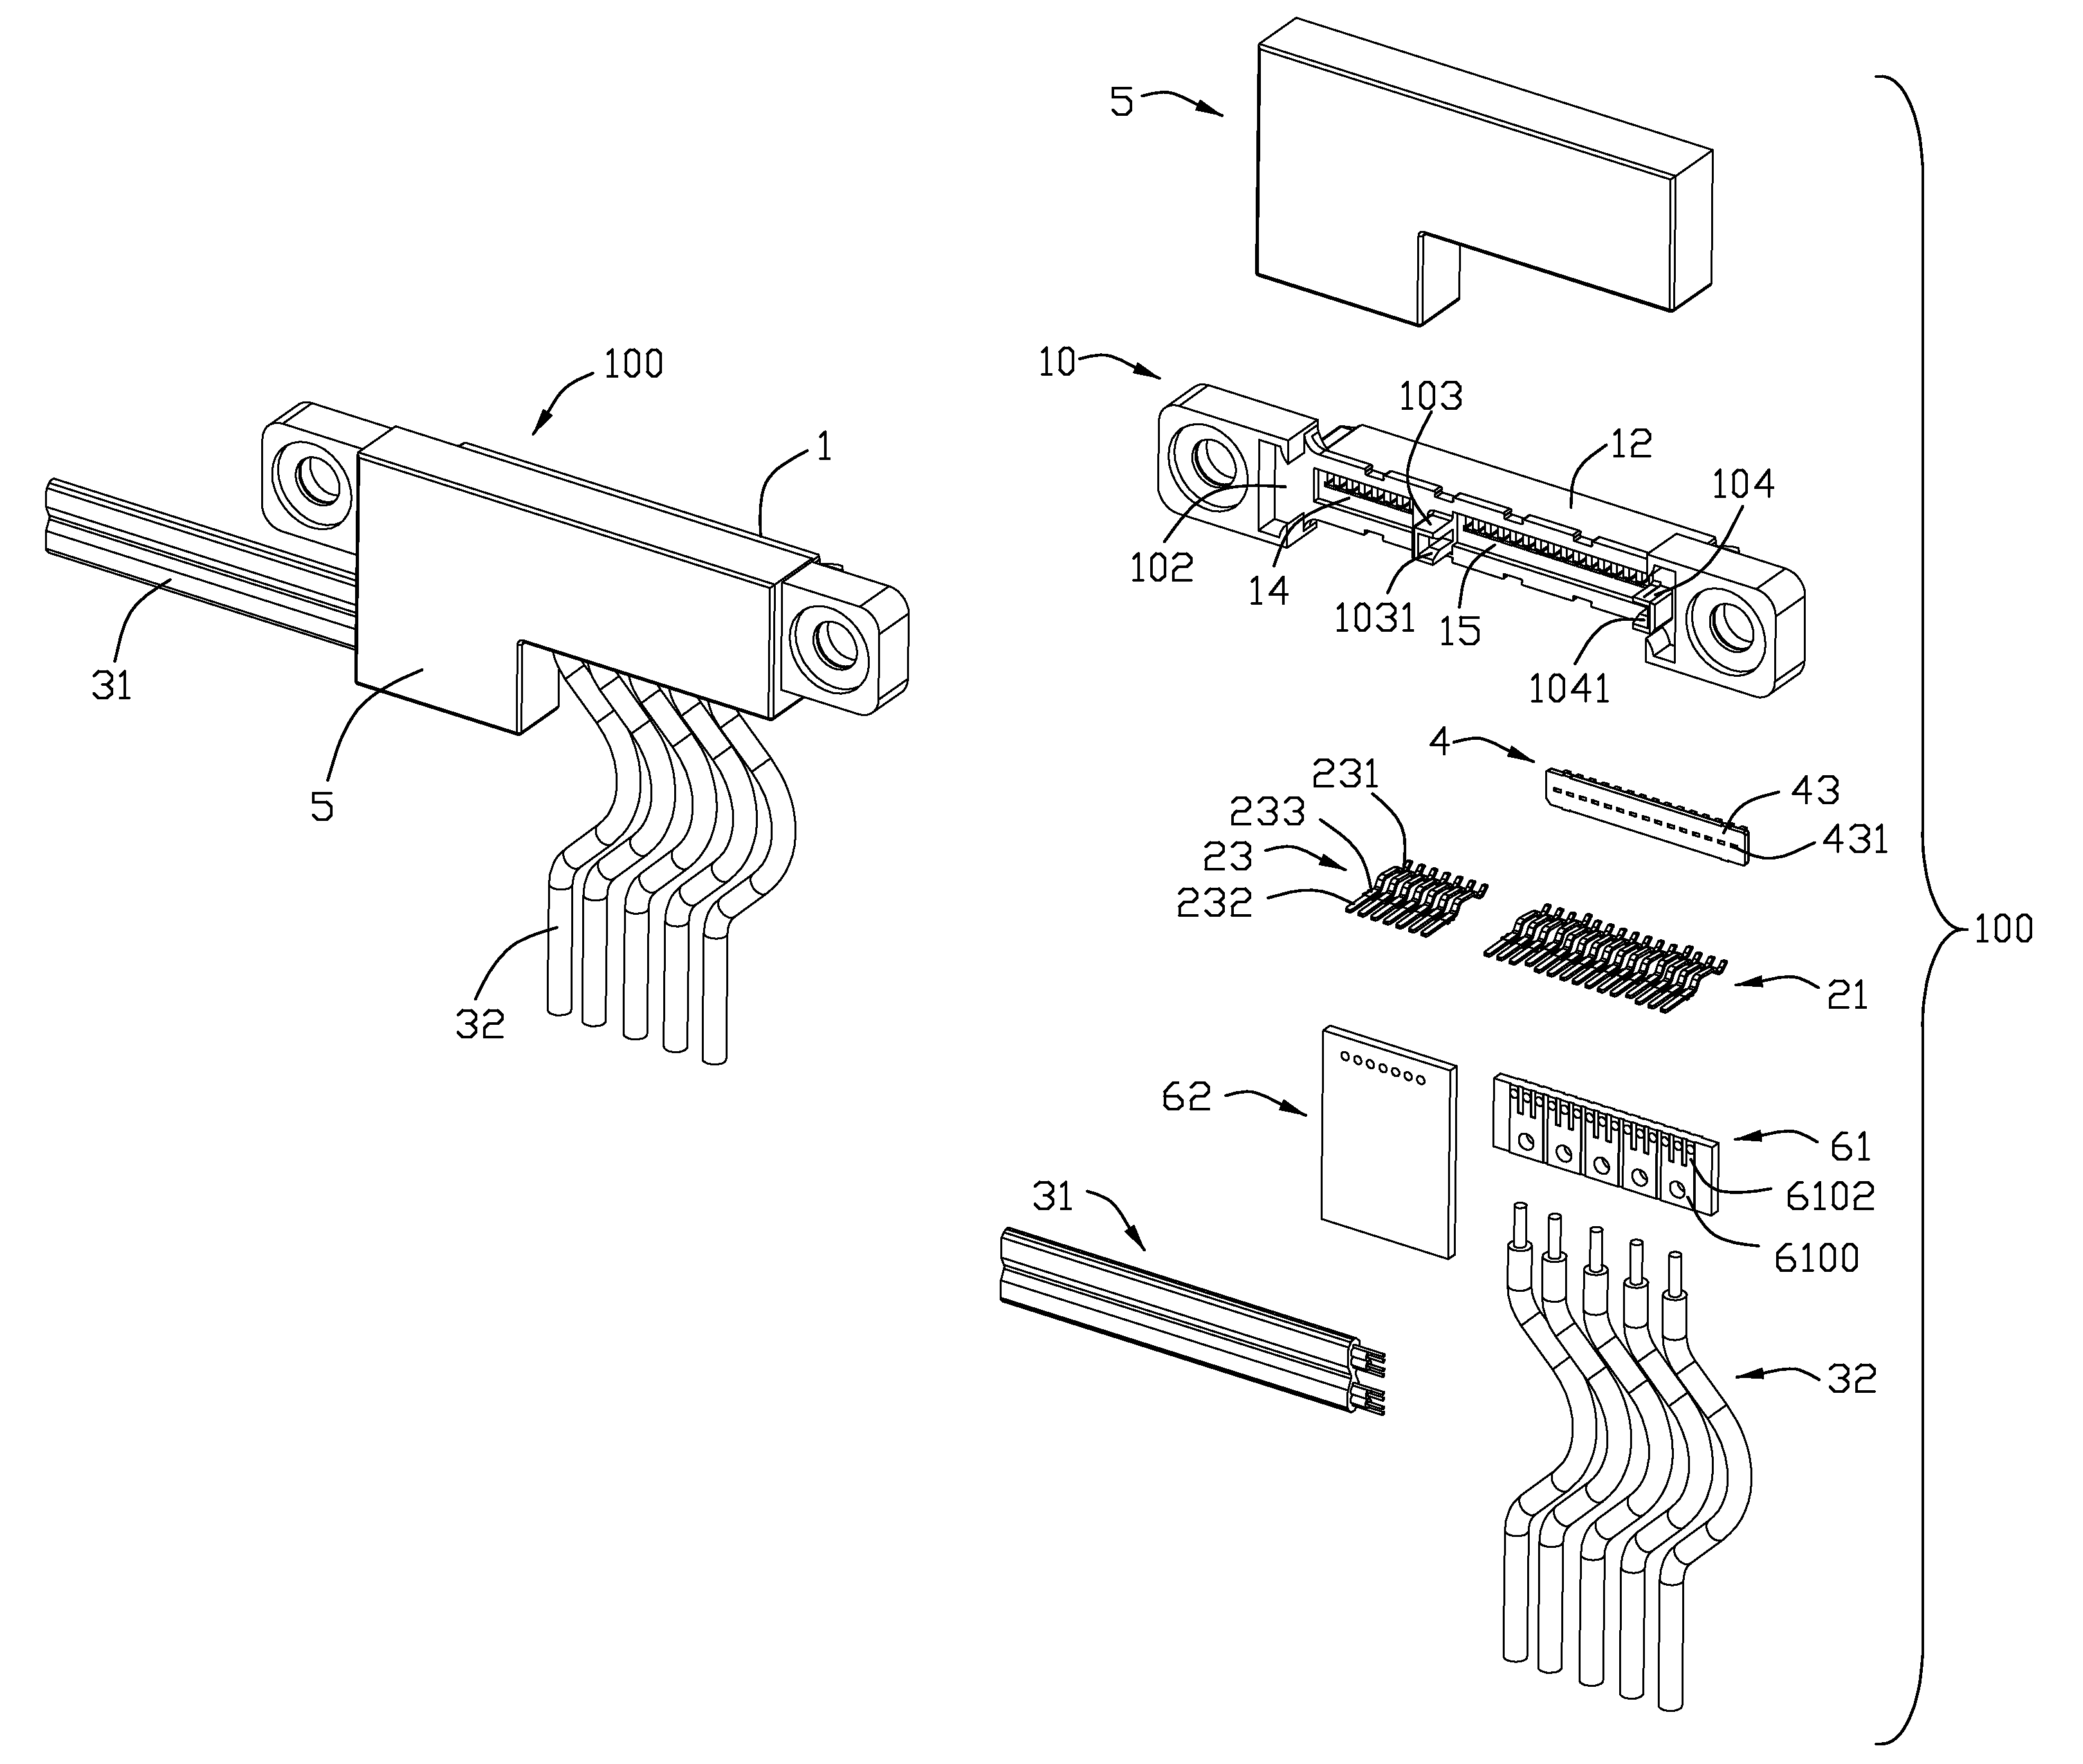 Plug connector with improved cable arrangement and convenient assembly